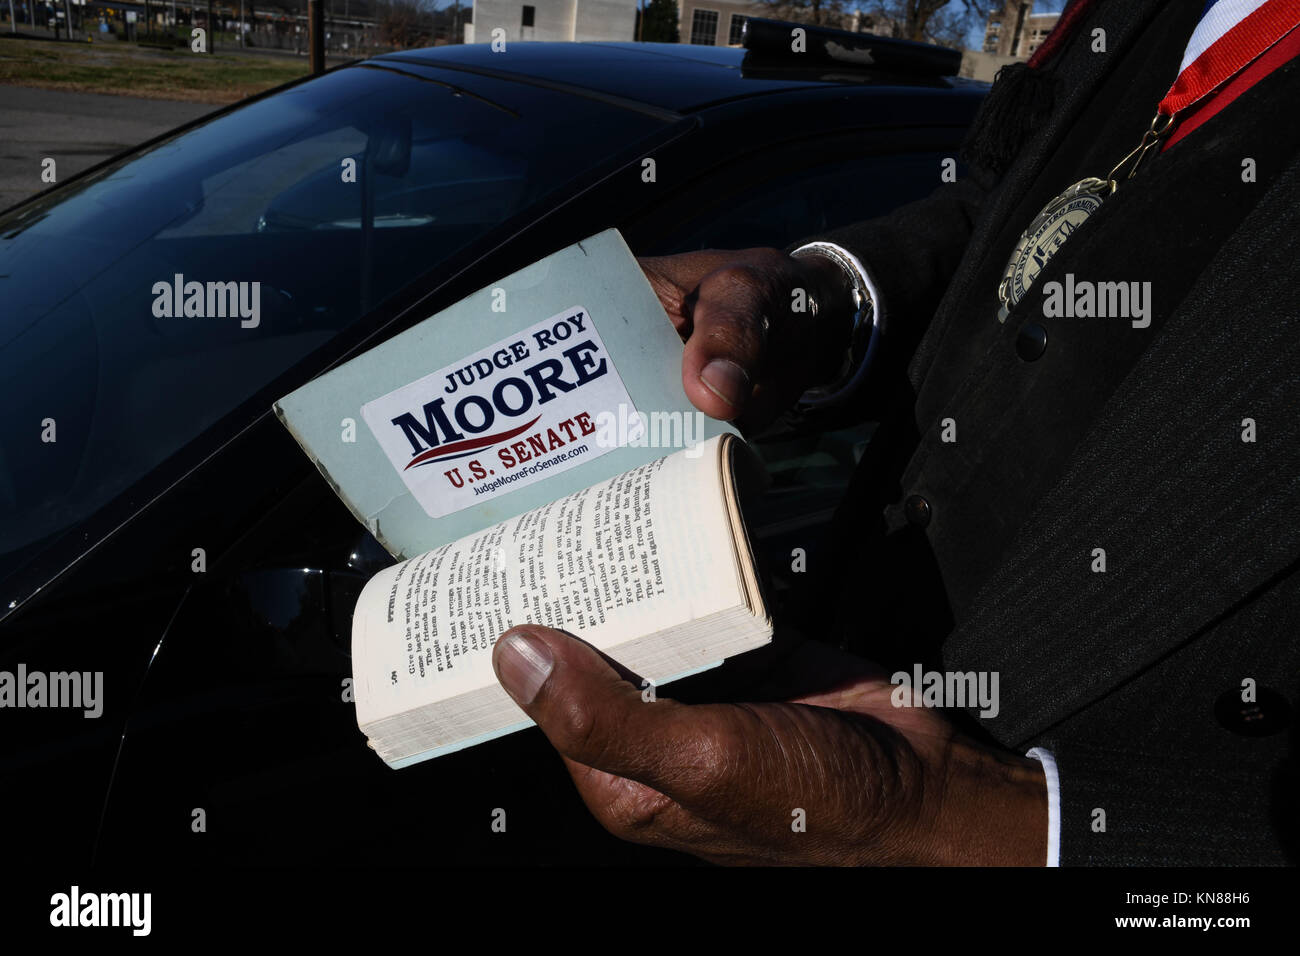 Birminham, Alabama, USA. 10th Dec, 2017. A member of the historic 16th Street Baptist Church shows the pro-Roy Moore sticker on the last page of his catechism booklet on the last Sunday before the divisive and pivotal U.S. Senate election between GOP candidate Roy Moore and Democrat Doug Jones, famous for prosecuted one of the KKK members convicted of bombing the downtown Birmingham church. The member, Mr. Wille Casey, said he considered himself 'colored,'' due to his mixed ethnic background, rather than 'black. Credit: Miguel Juarez Lugo/ZUMA Wire/Alamy Live News Stock Photo